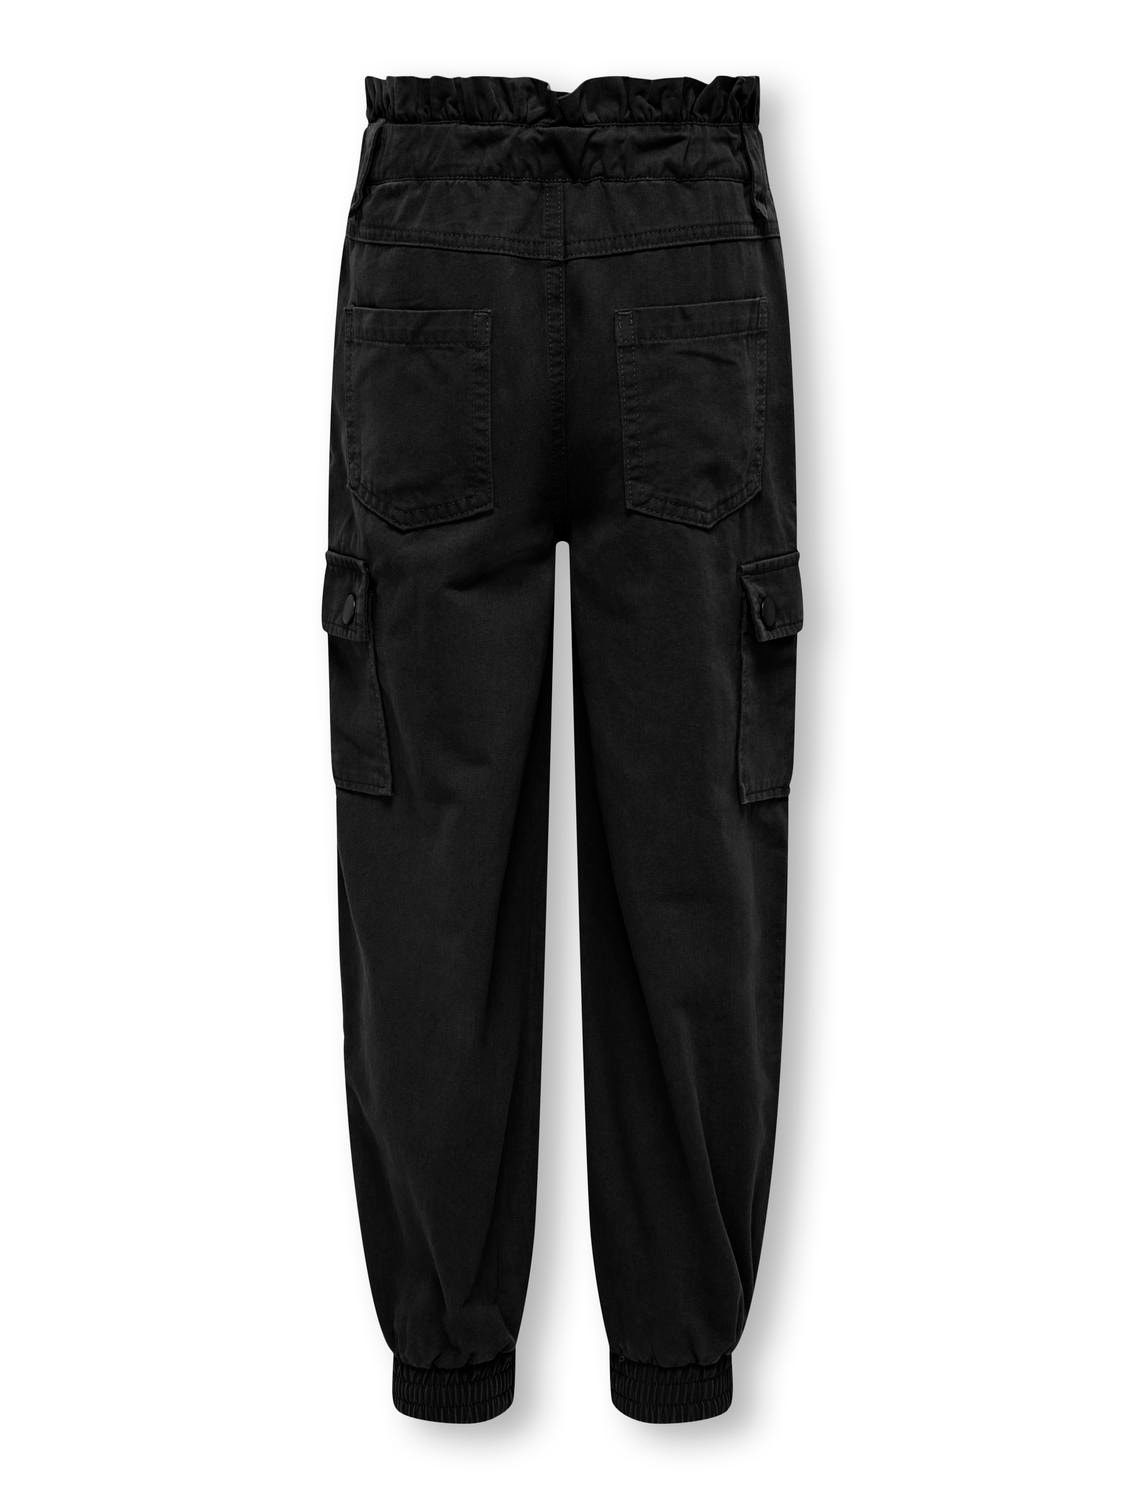 ONLY Cargo trousers -Black - 15303221